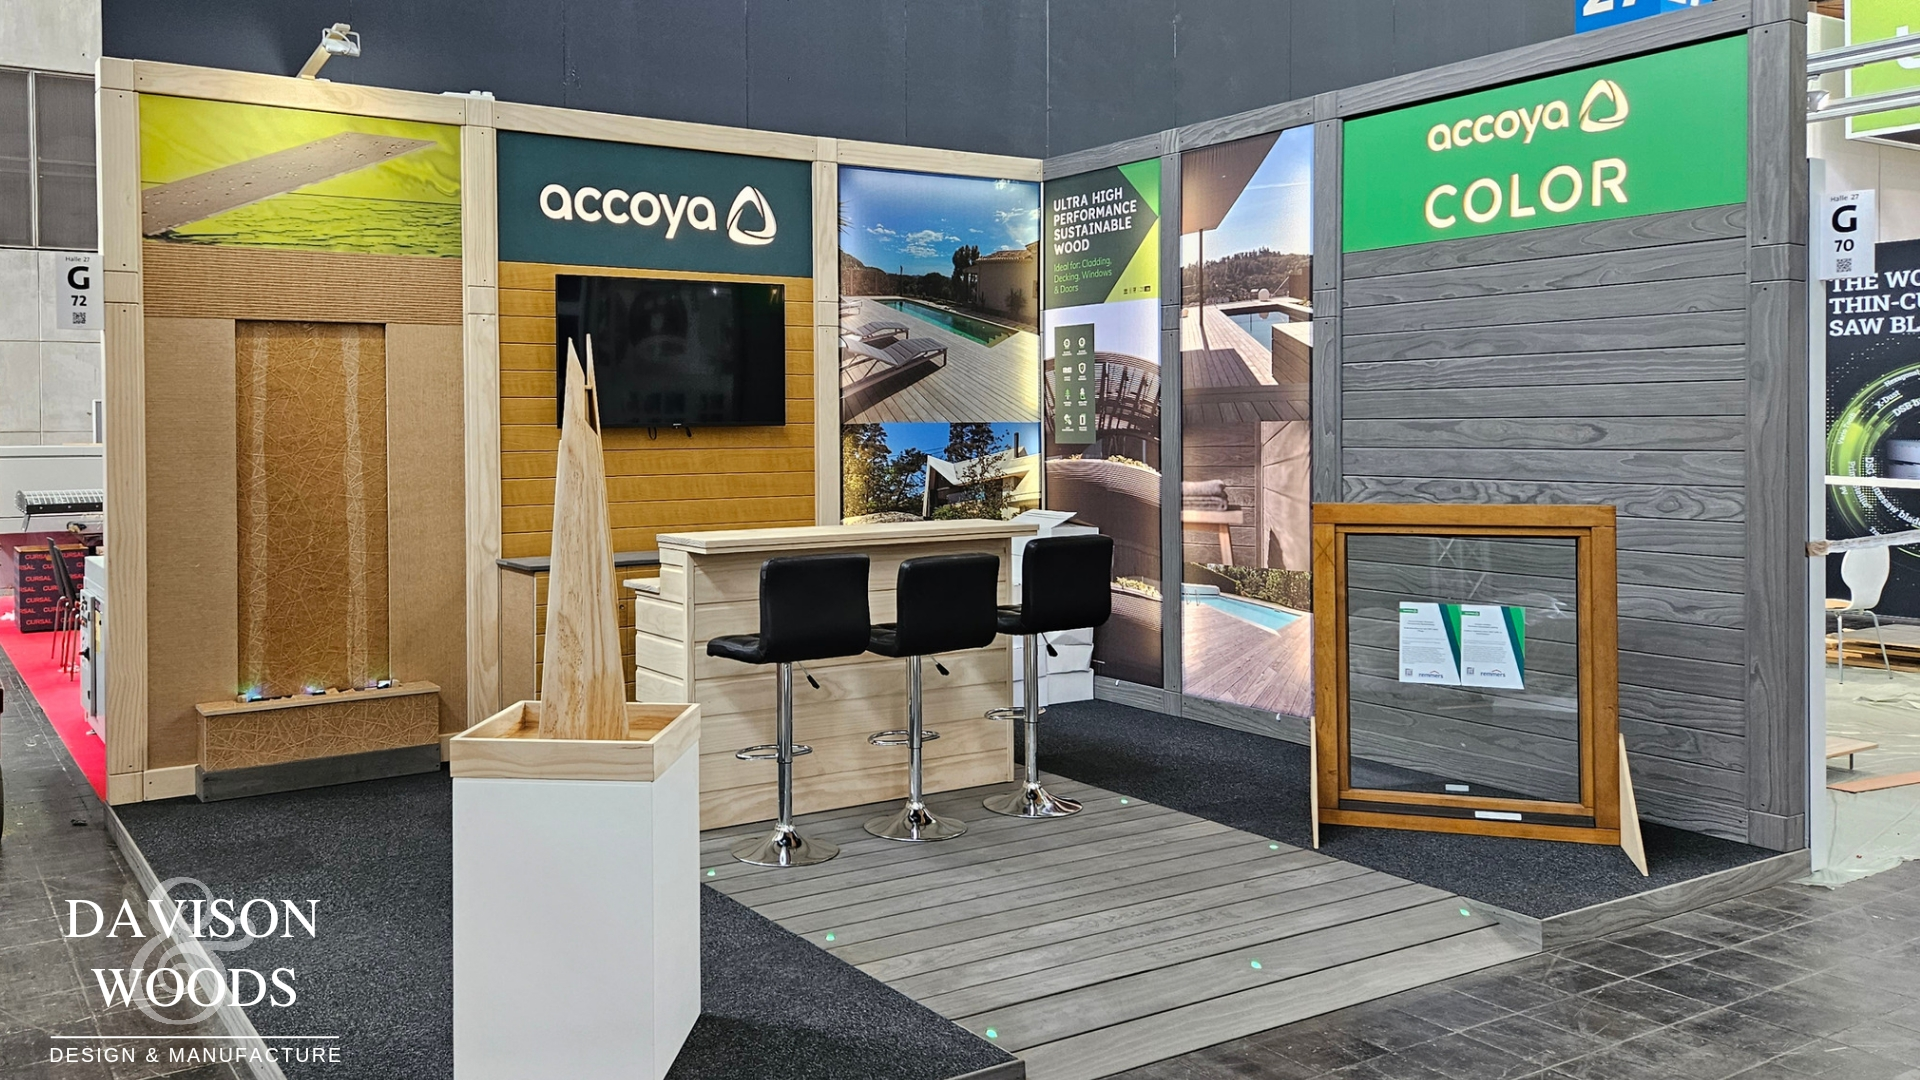 Accoya exhibition stand with signage stating 'Accoya color ultra high performance sustainable wood' 